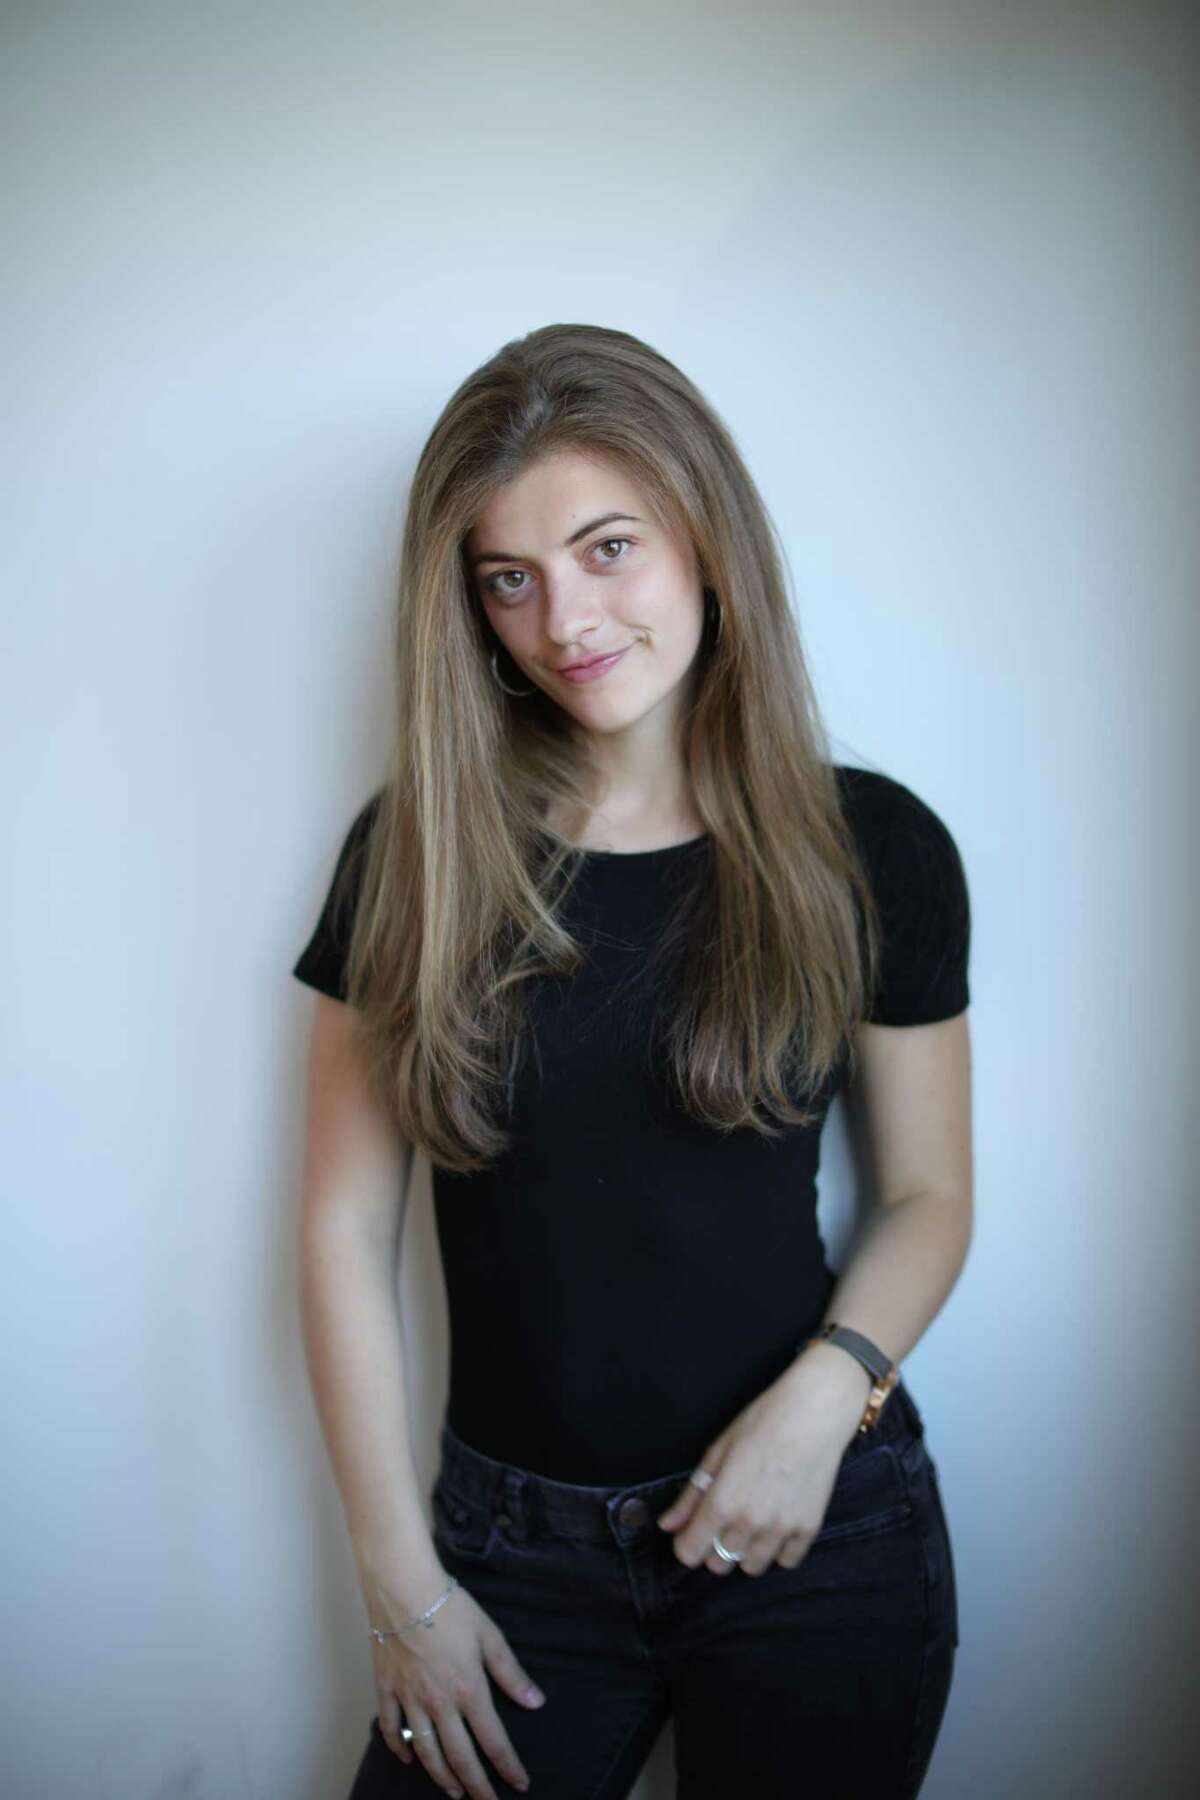 Sofia Bara is a Weston native who produced the film "The Other Side" with her NYU classmates.